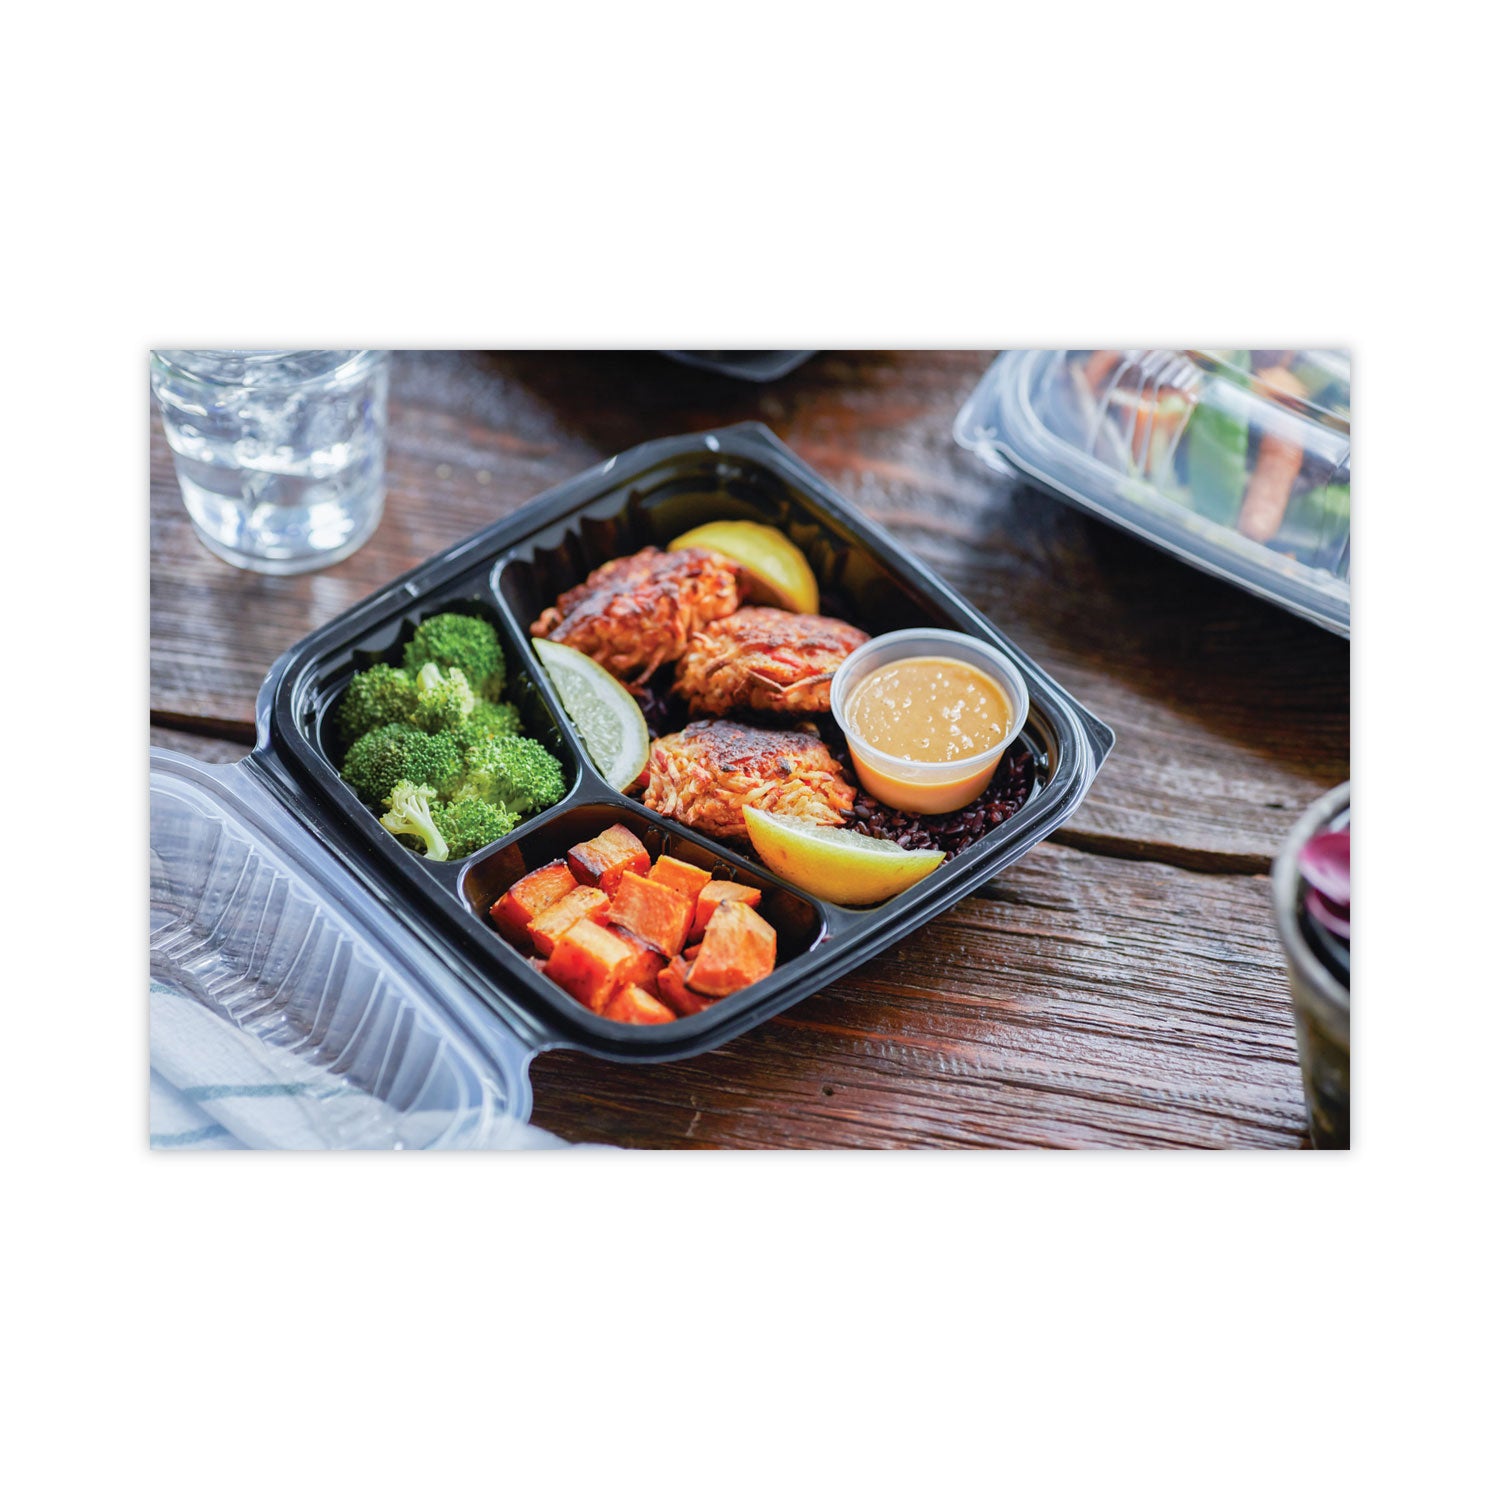 earthchoice-vented-dual-color-microwavable-hinged-lid-container-3-compartment-21oz-85x85x3-black-clear-plastic-150-ct_pctdc858310b000 - 4